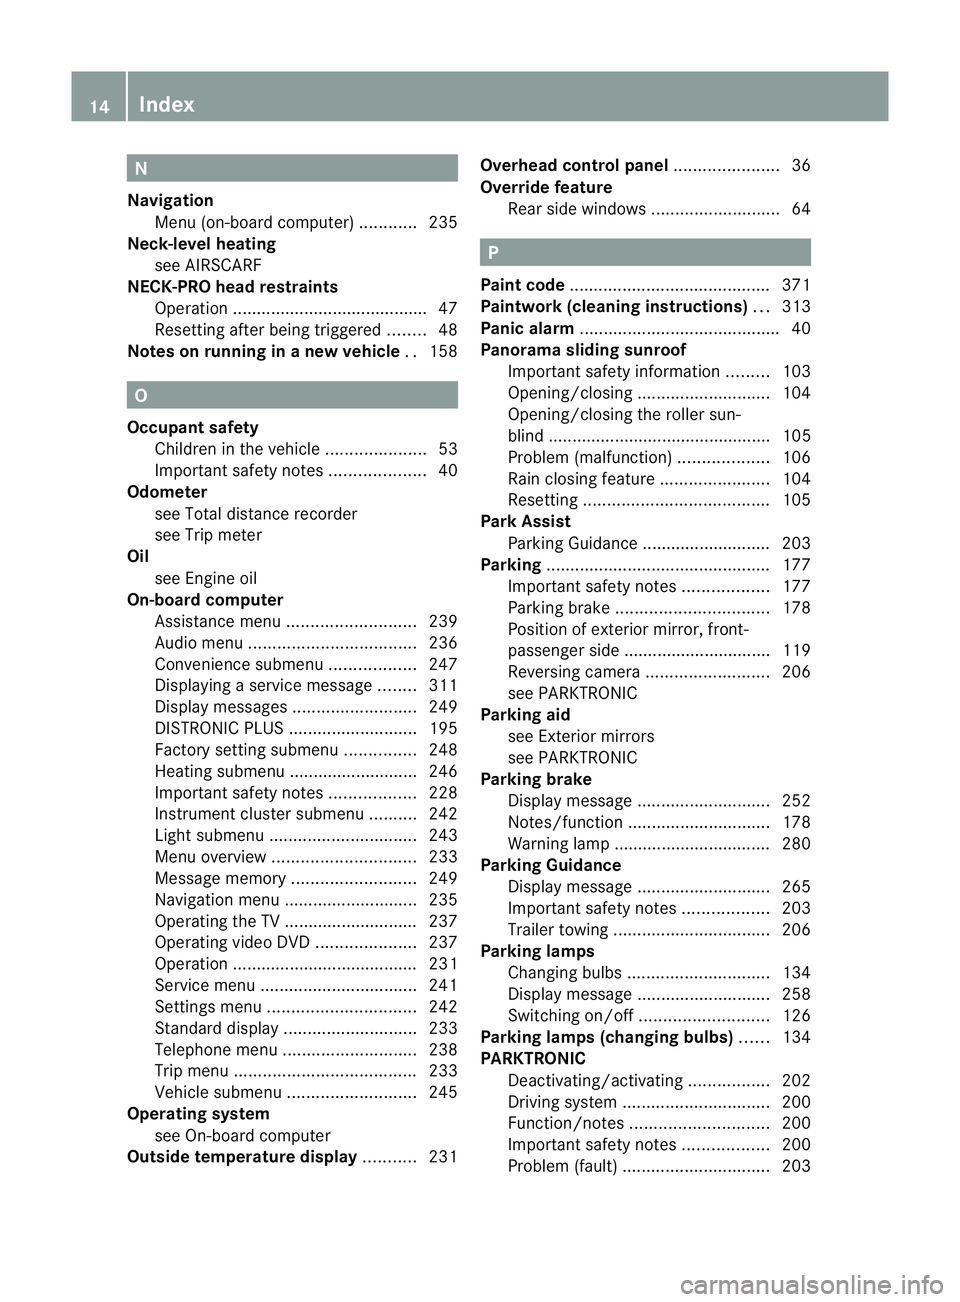 MERCEDES-BENZ E-CLASS COUPE 2012  Owners Manual N
Navigation Menu (on-board computer) ............235
Neck-level heating
see AIRSCARF
NECK-PRO head restraints
Operation ........................................ .47
Resetting after being triggered ..